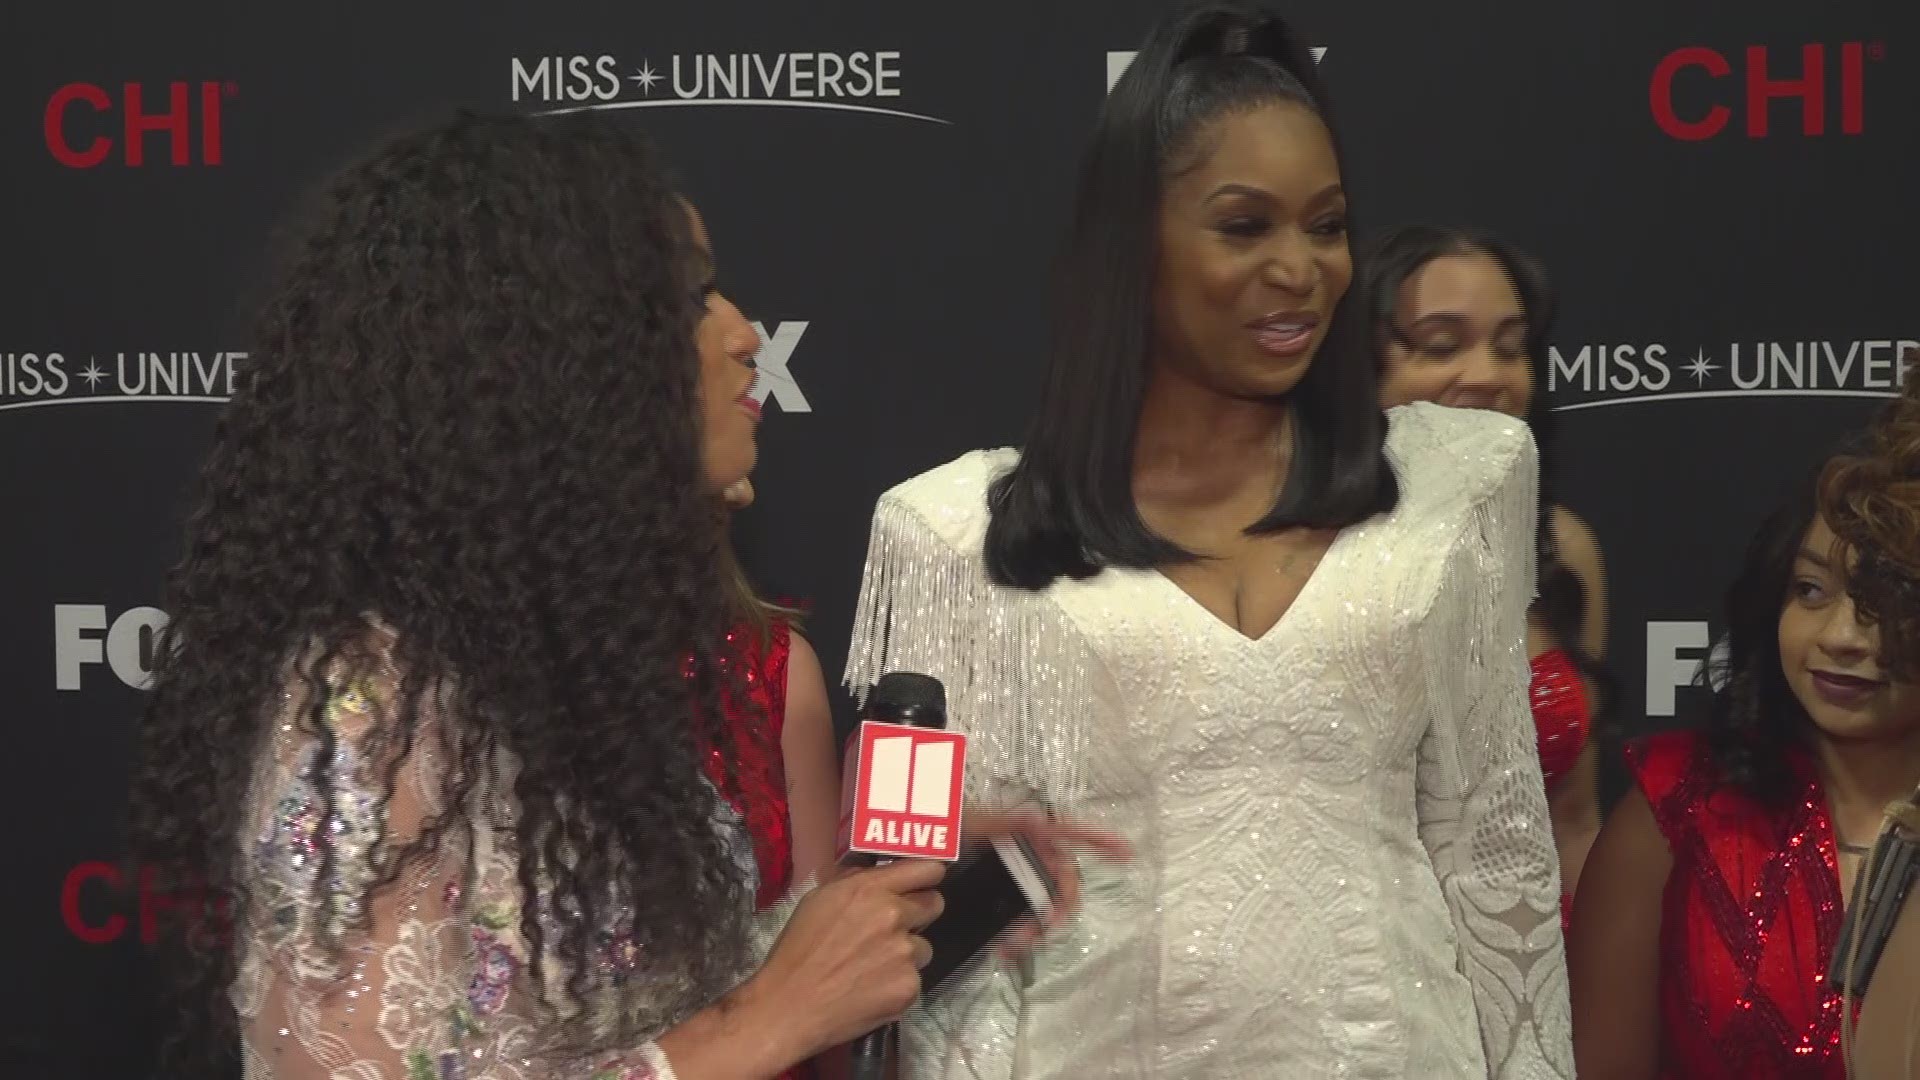 We caught up with the Real Housewives of Atlanta Star during the red carpet for the 2019 Miss Universe Competition.